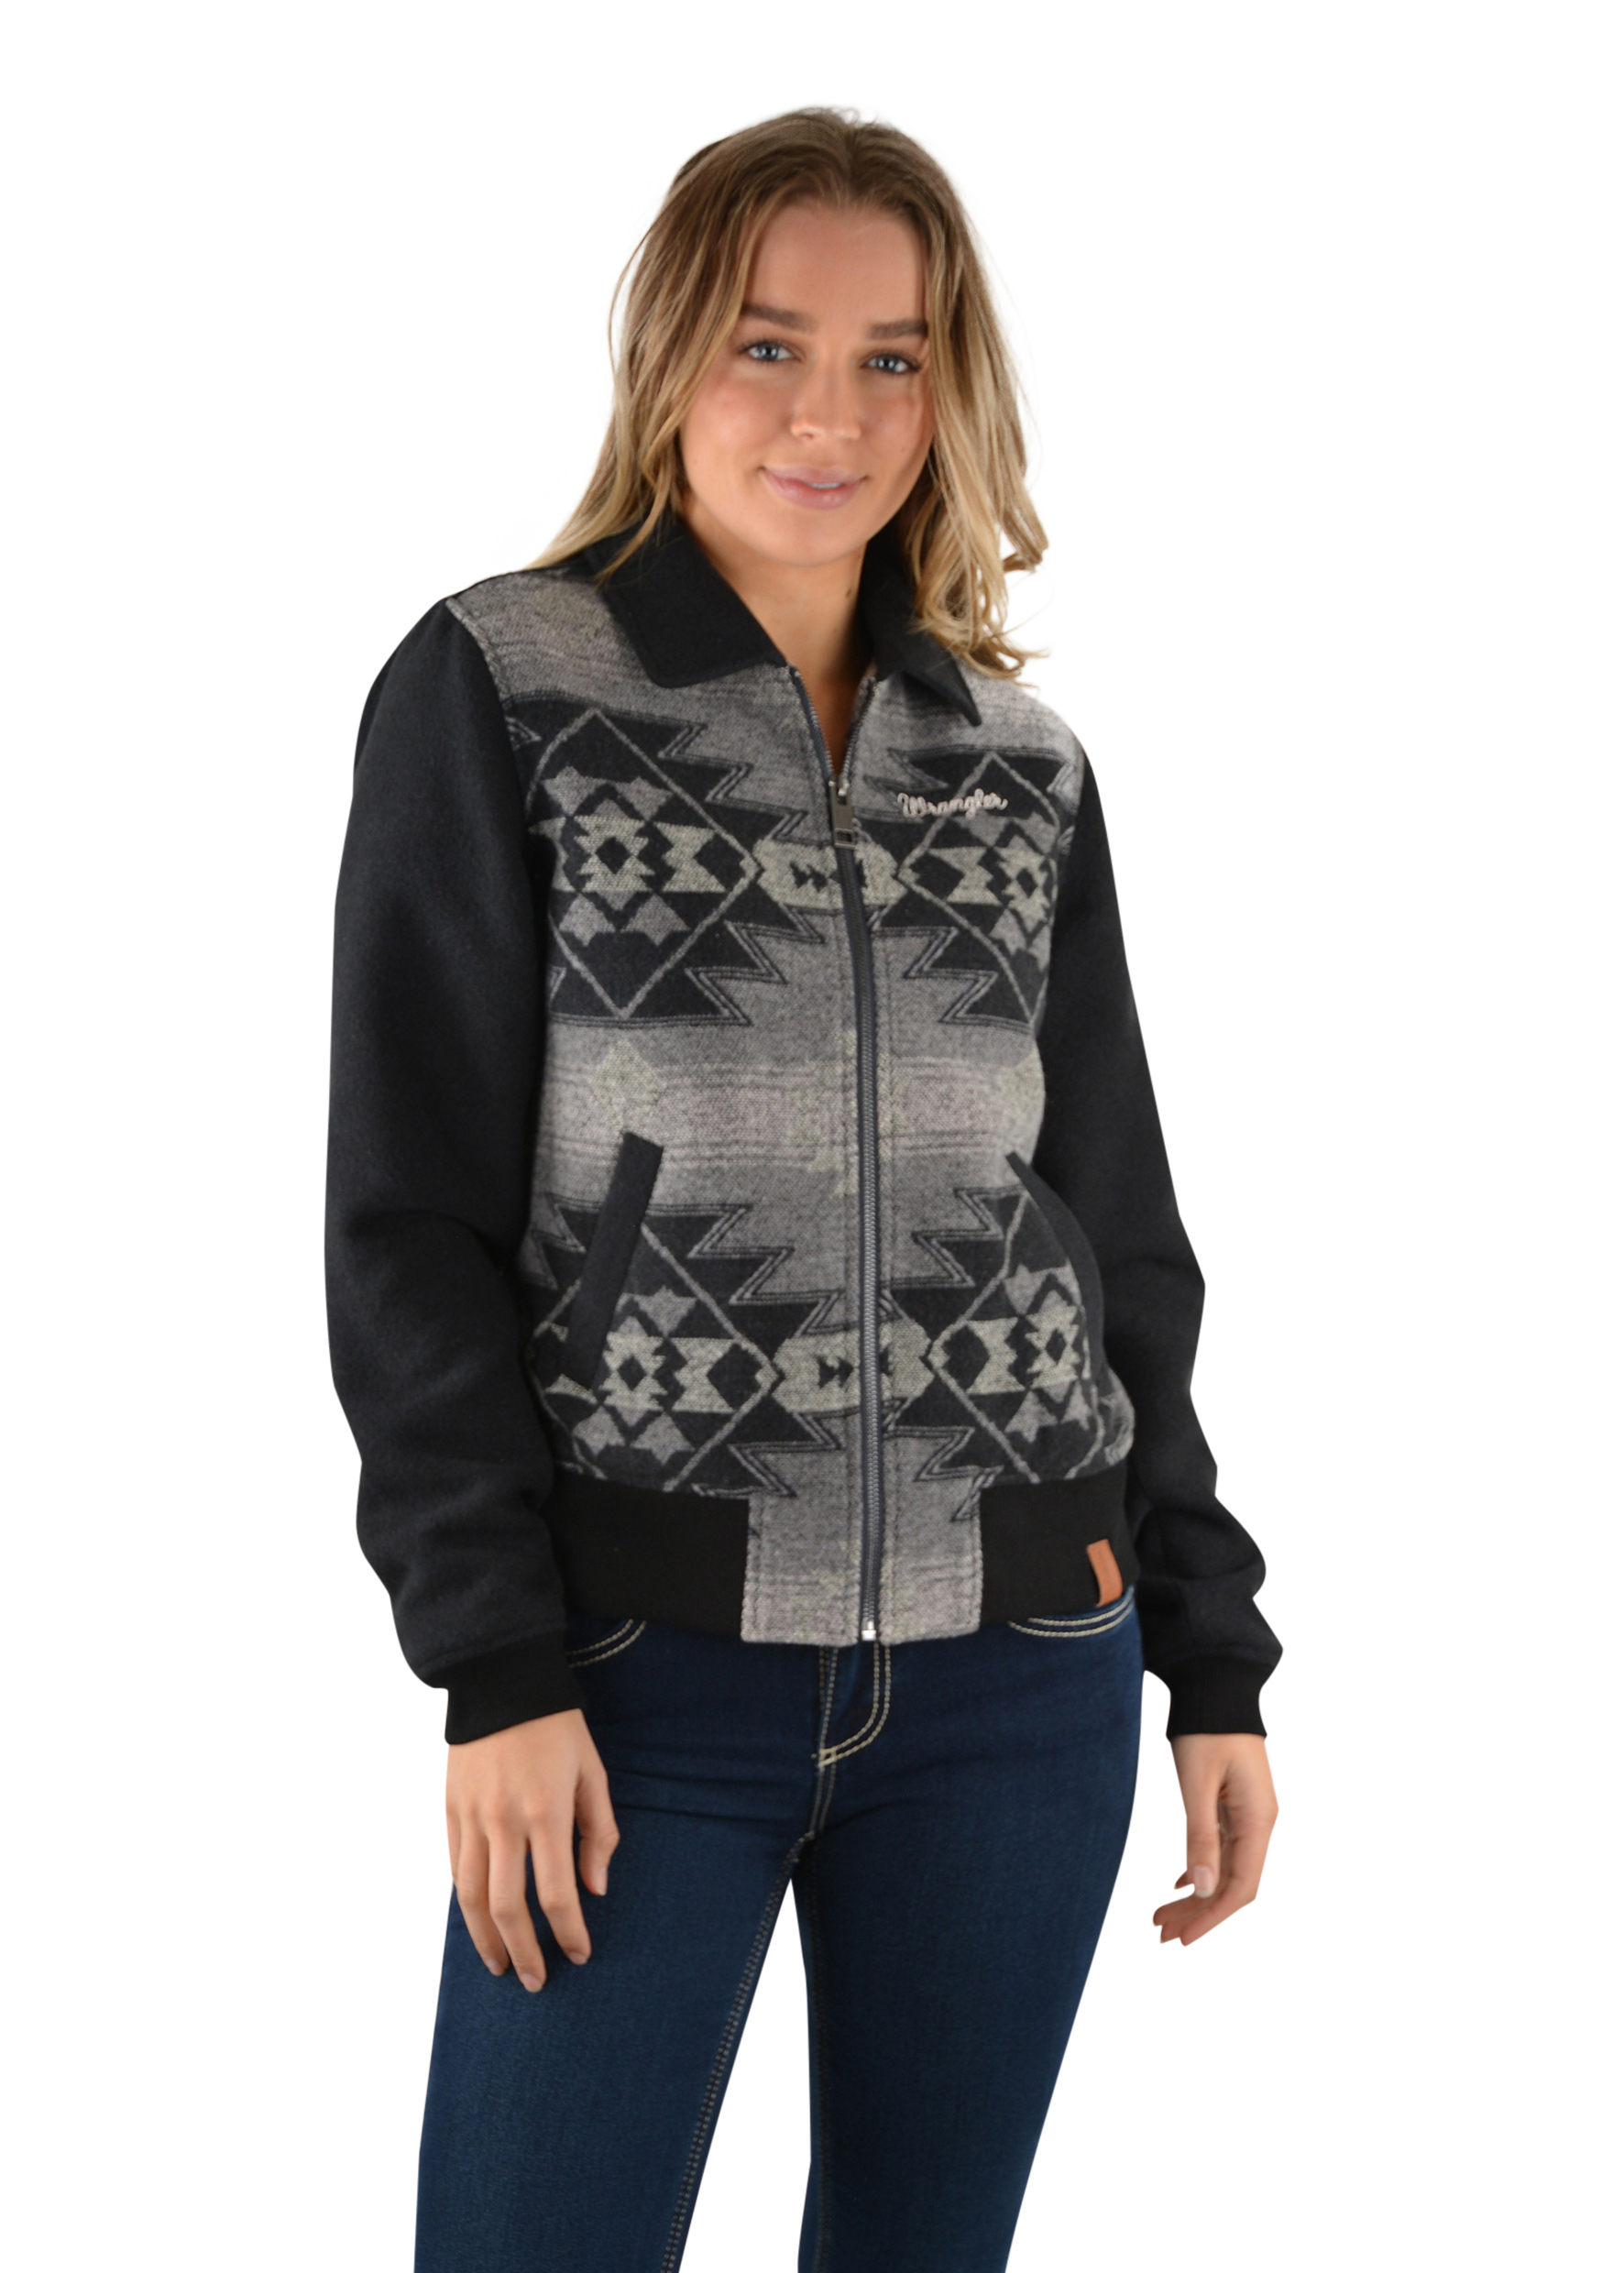 Wrangler Women's Millie Jacket - Donohues, City & Country Gear